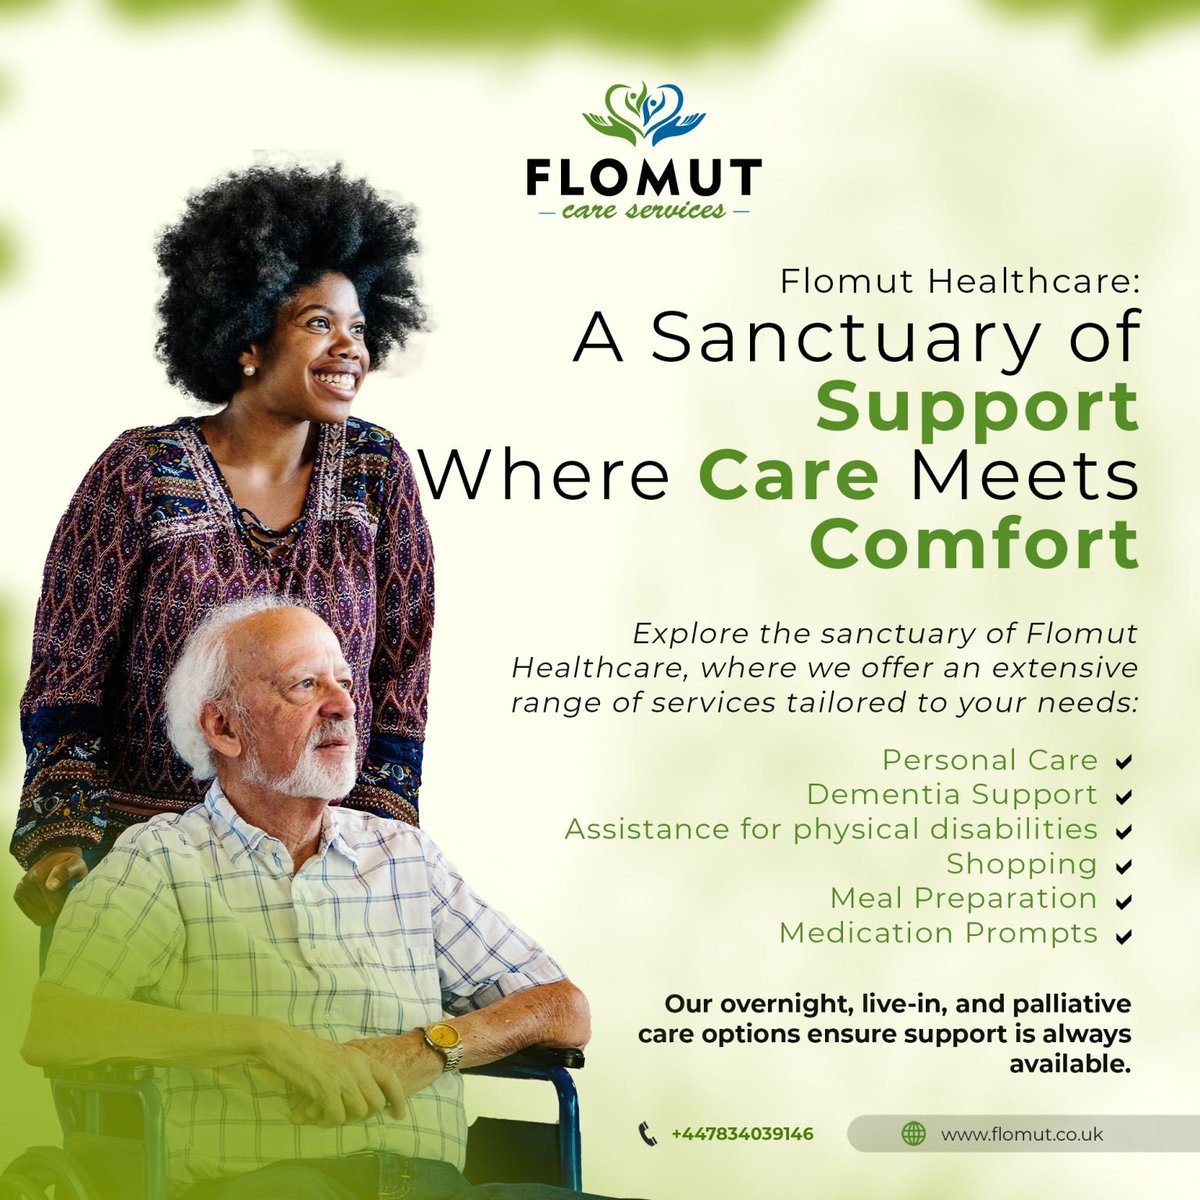 Find warmth and care entwined at FLOMUT, where your well-being is our heart's work. Experience a haven of support tailored just for you.